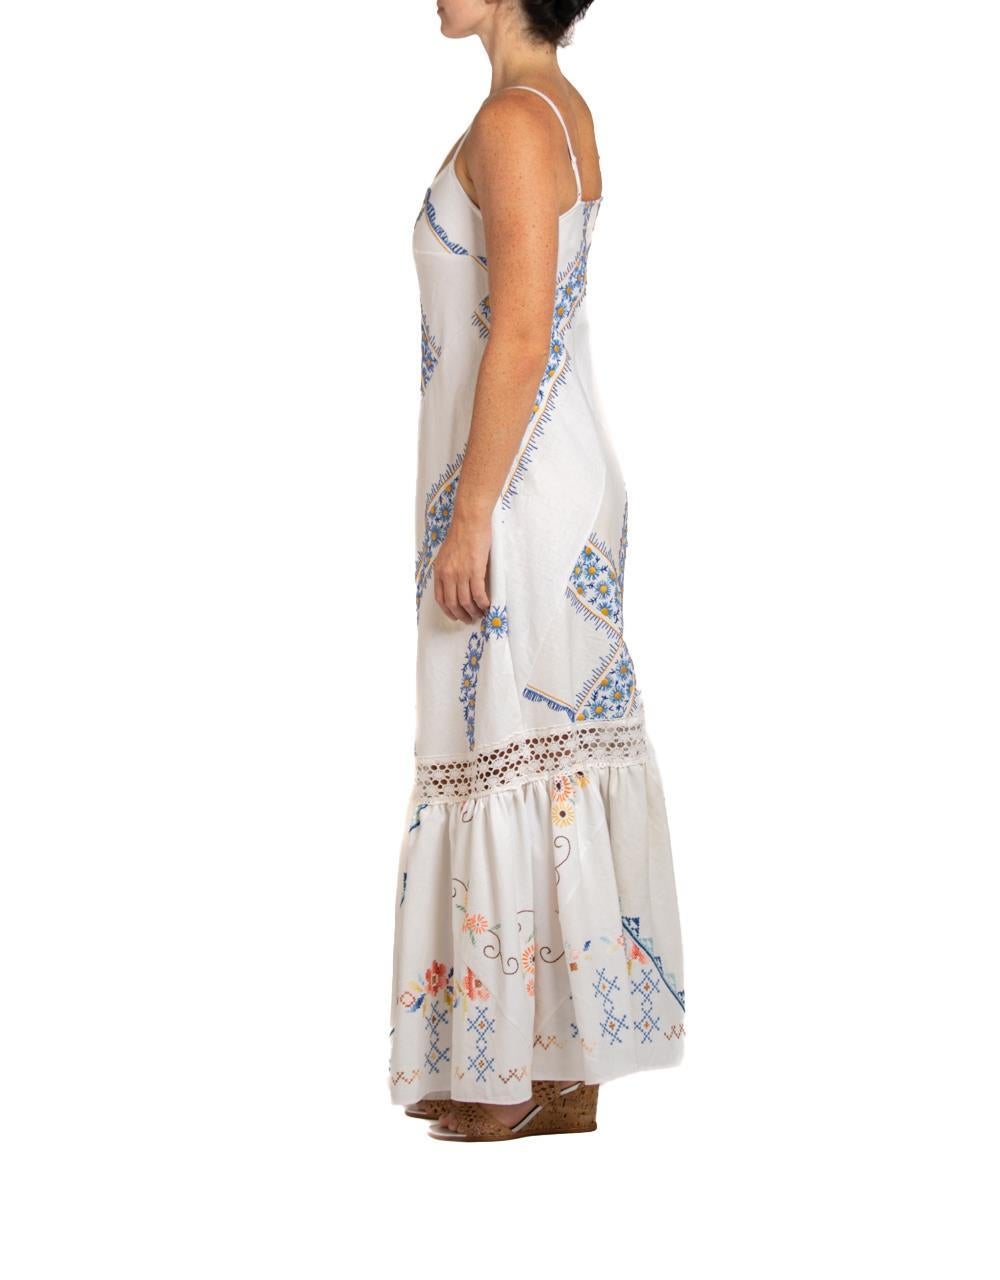 Women's MORPHEW COLLECTION White & Blue Hand Embroidered Fabric From France Dress For Sale